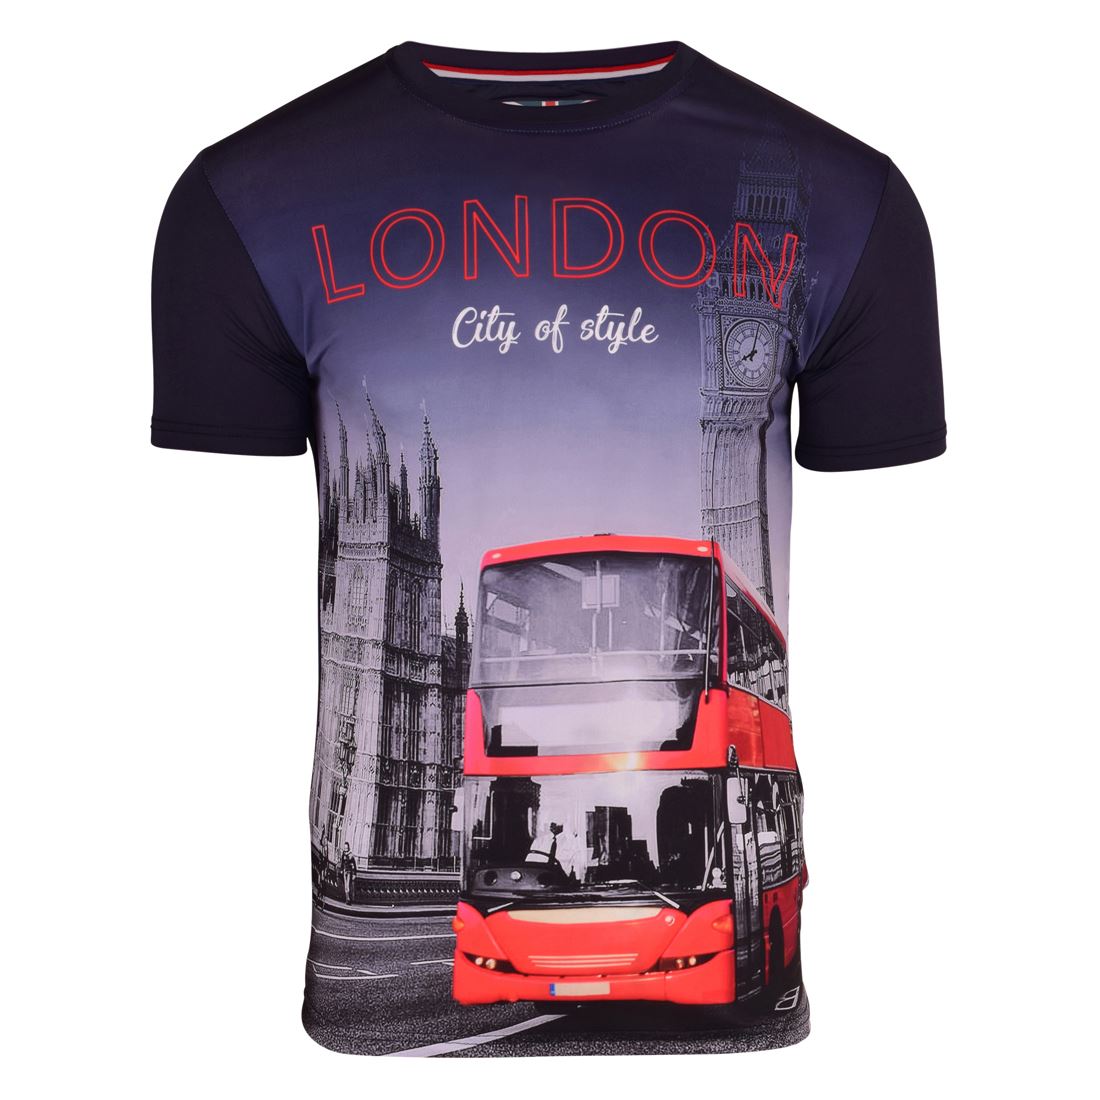 Mens London Graphic T Shirt Iconic Red Bus Big Ben Tee Summer UK Gift Top